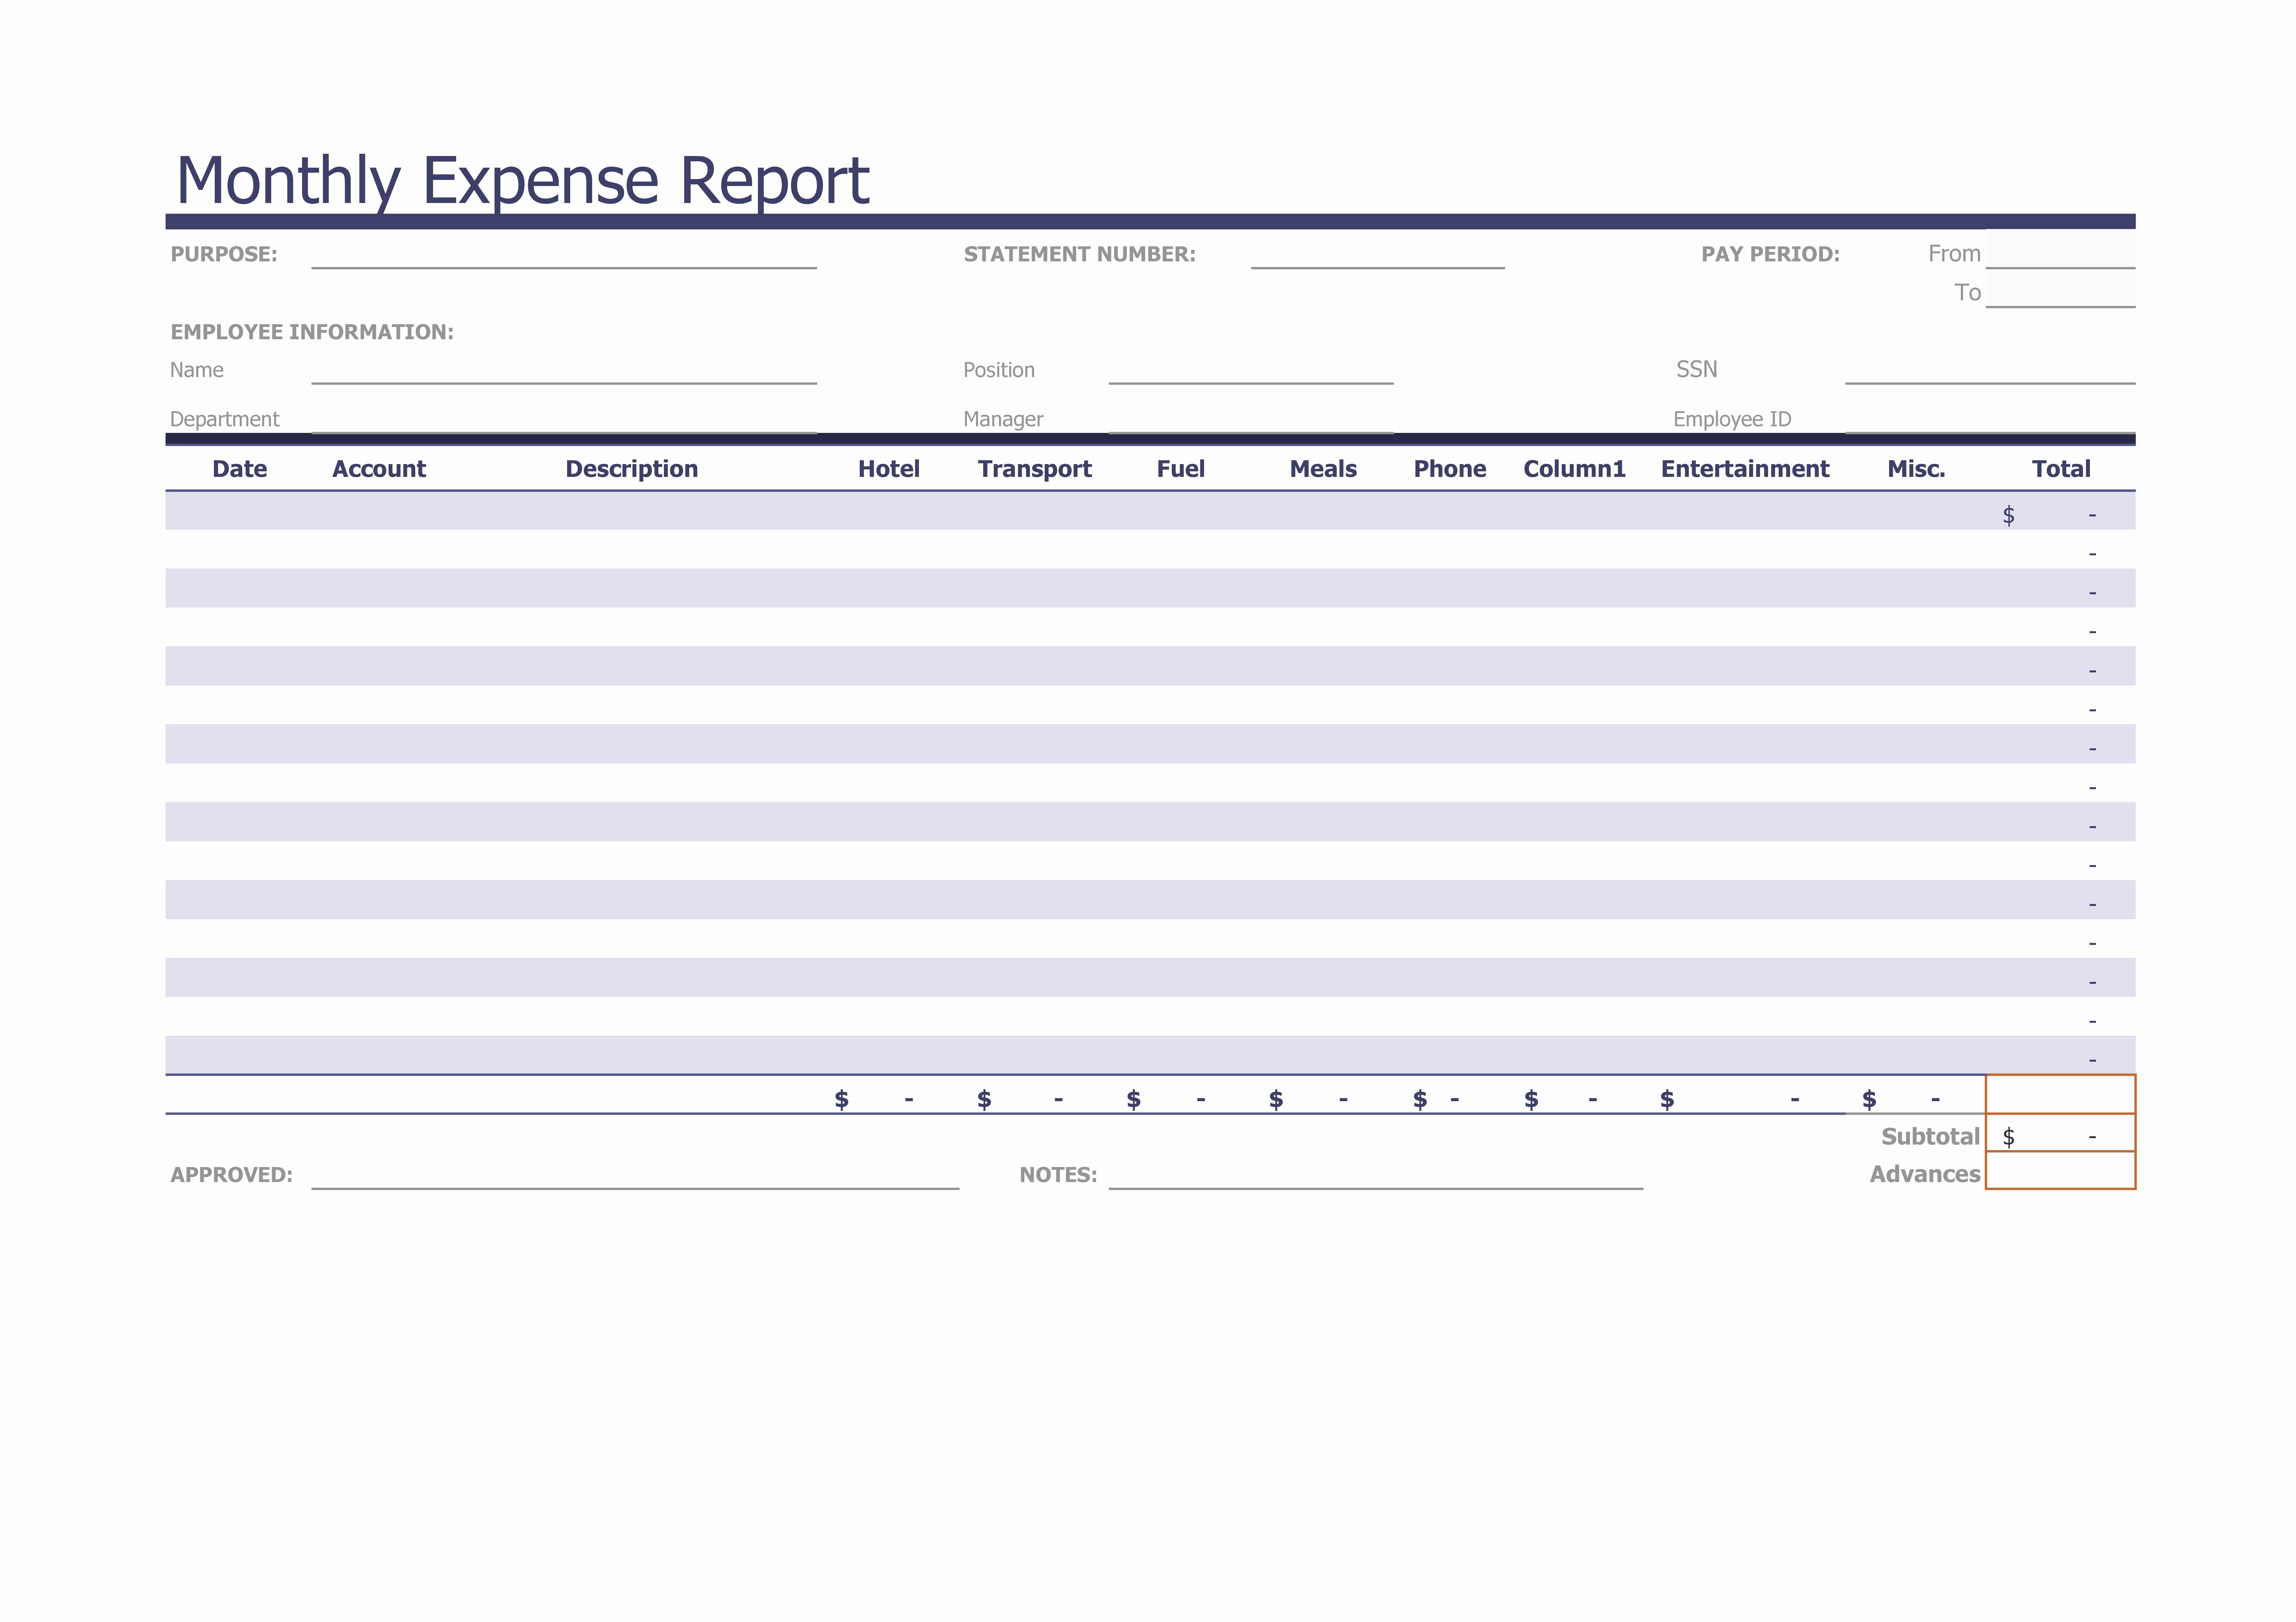 Microsoft Word Expense Report Template Beautiful 40 Expense Report Templates to Help You Save Money